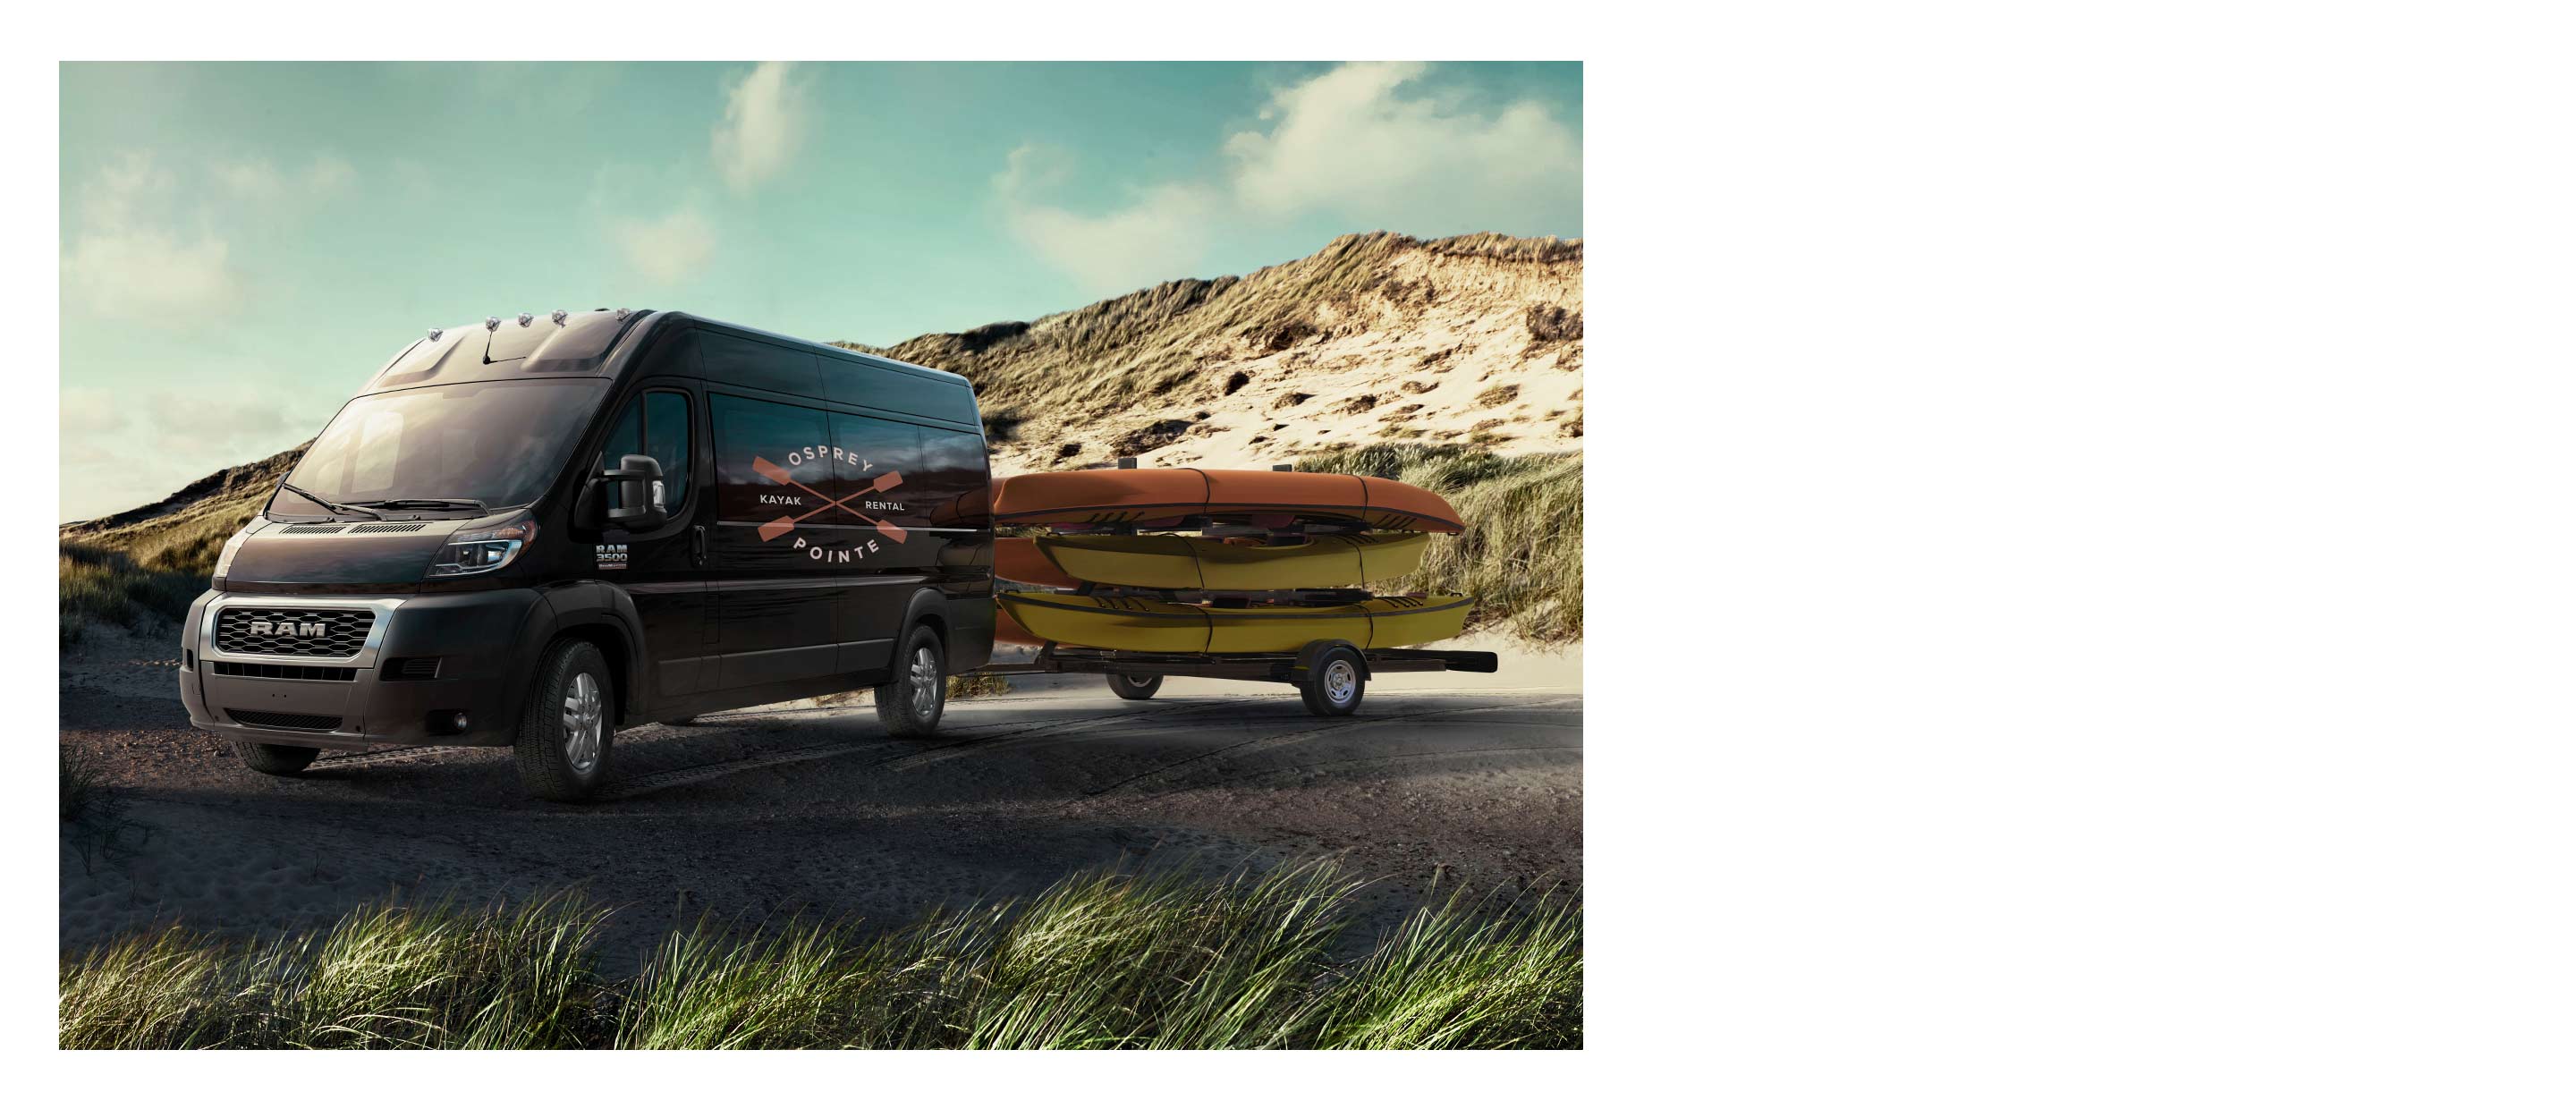 The 2022 Ram ProMaster towing a flatbed loaded with five kayaks.